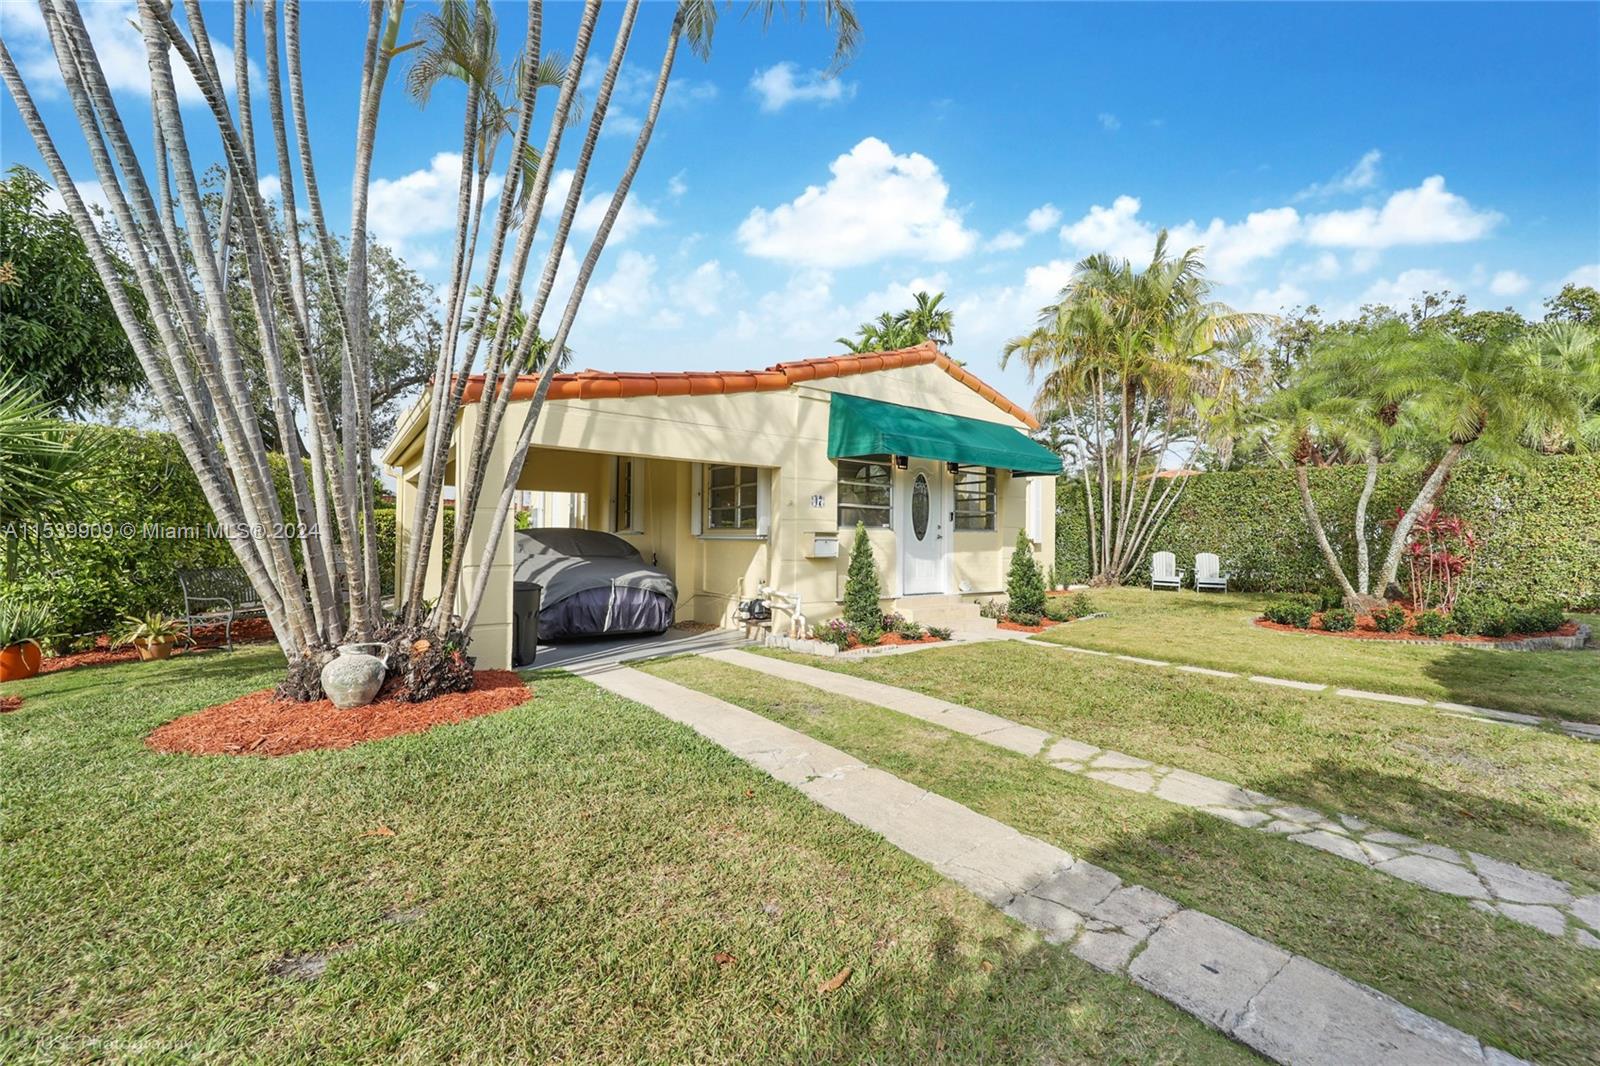 Property for Sale at 47 Fonseca Ave, Coral Gables, Broward County, Florida - Bedrooms: 3 
Bathrooms: 2  - $959,000